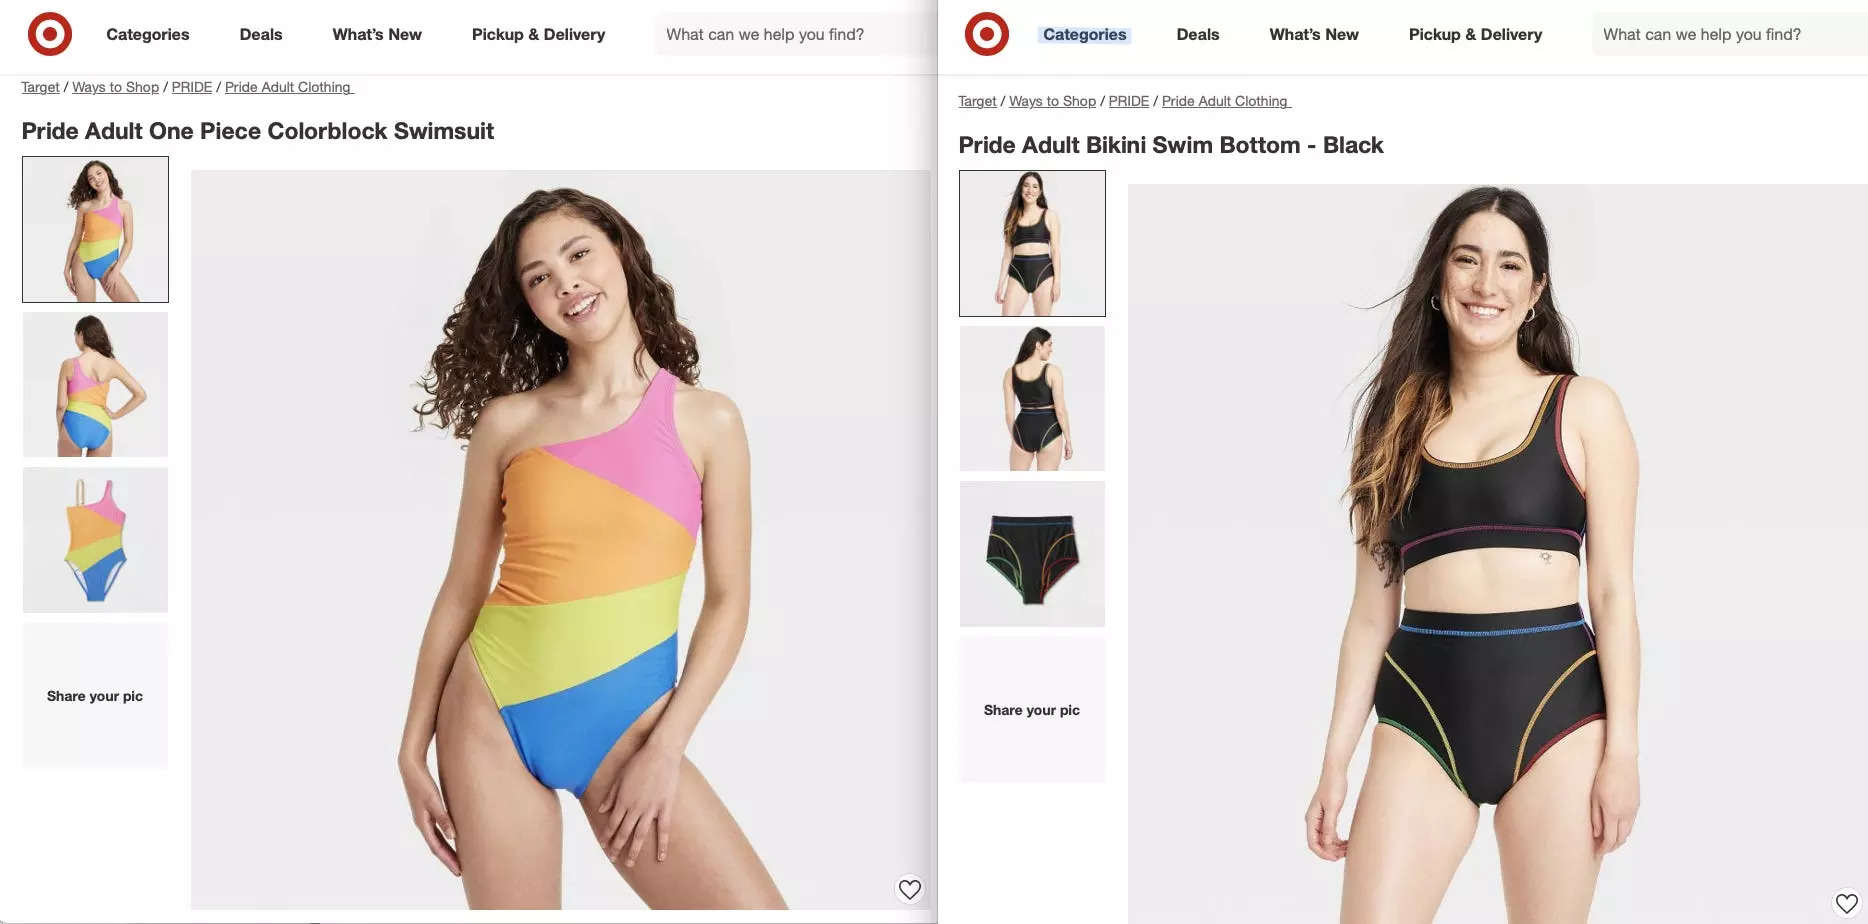 No, Target didn't offer 'tuck friendly' bathing suits for kids